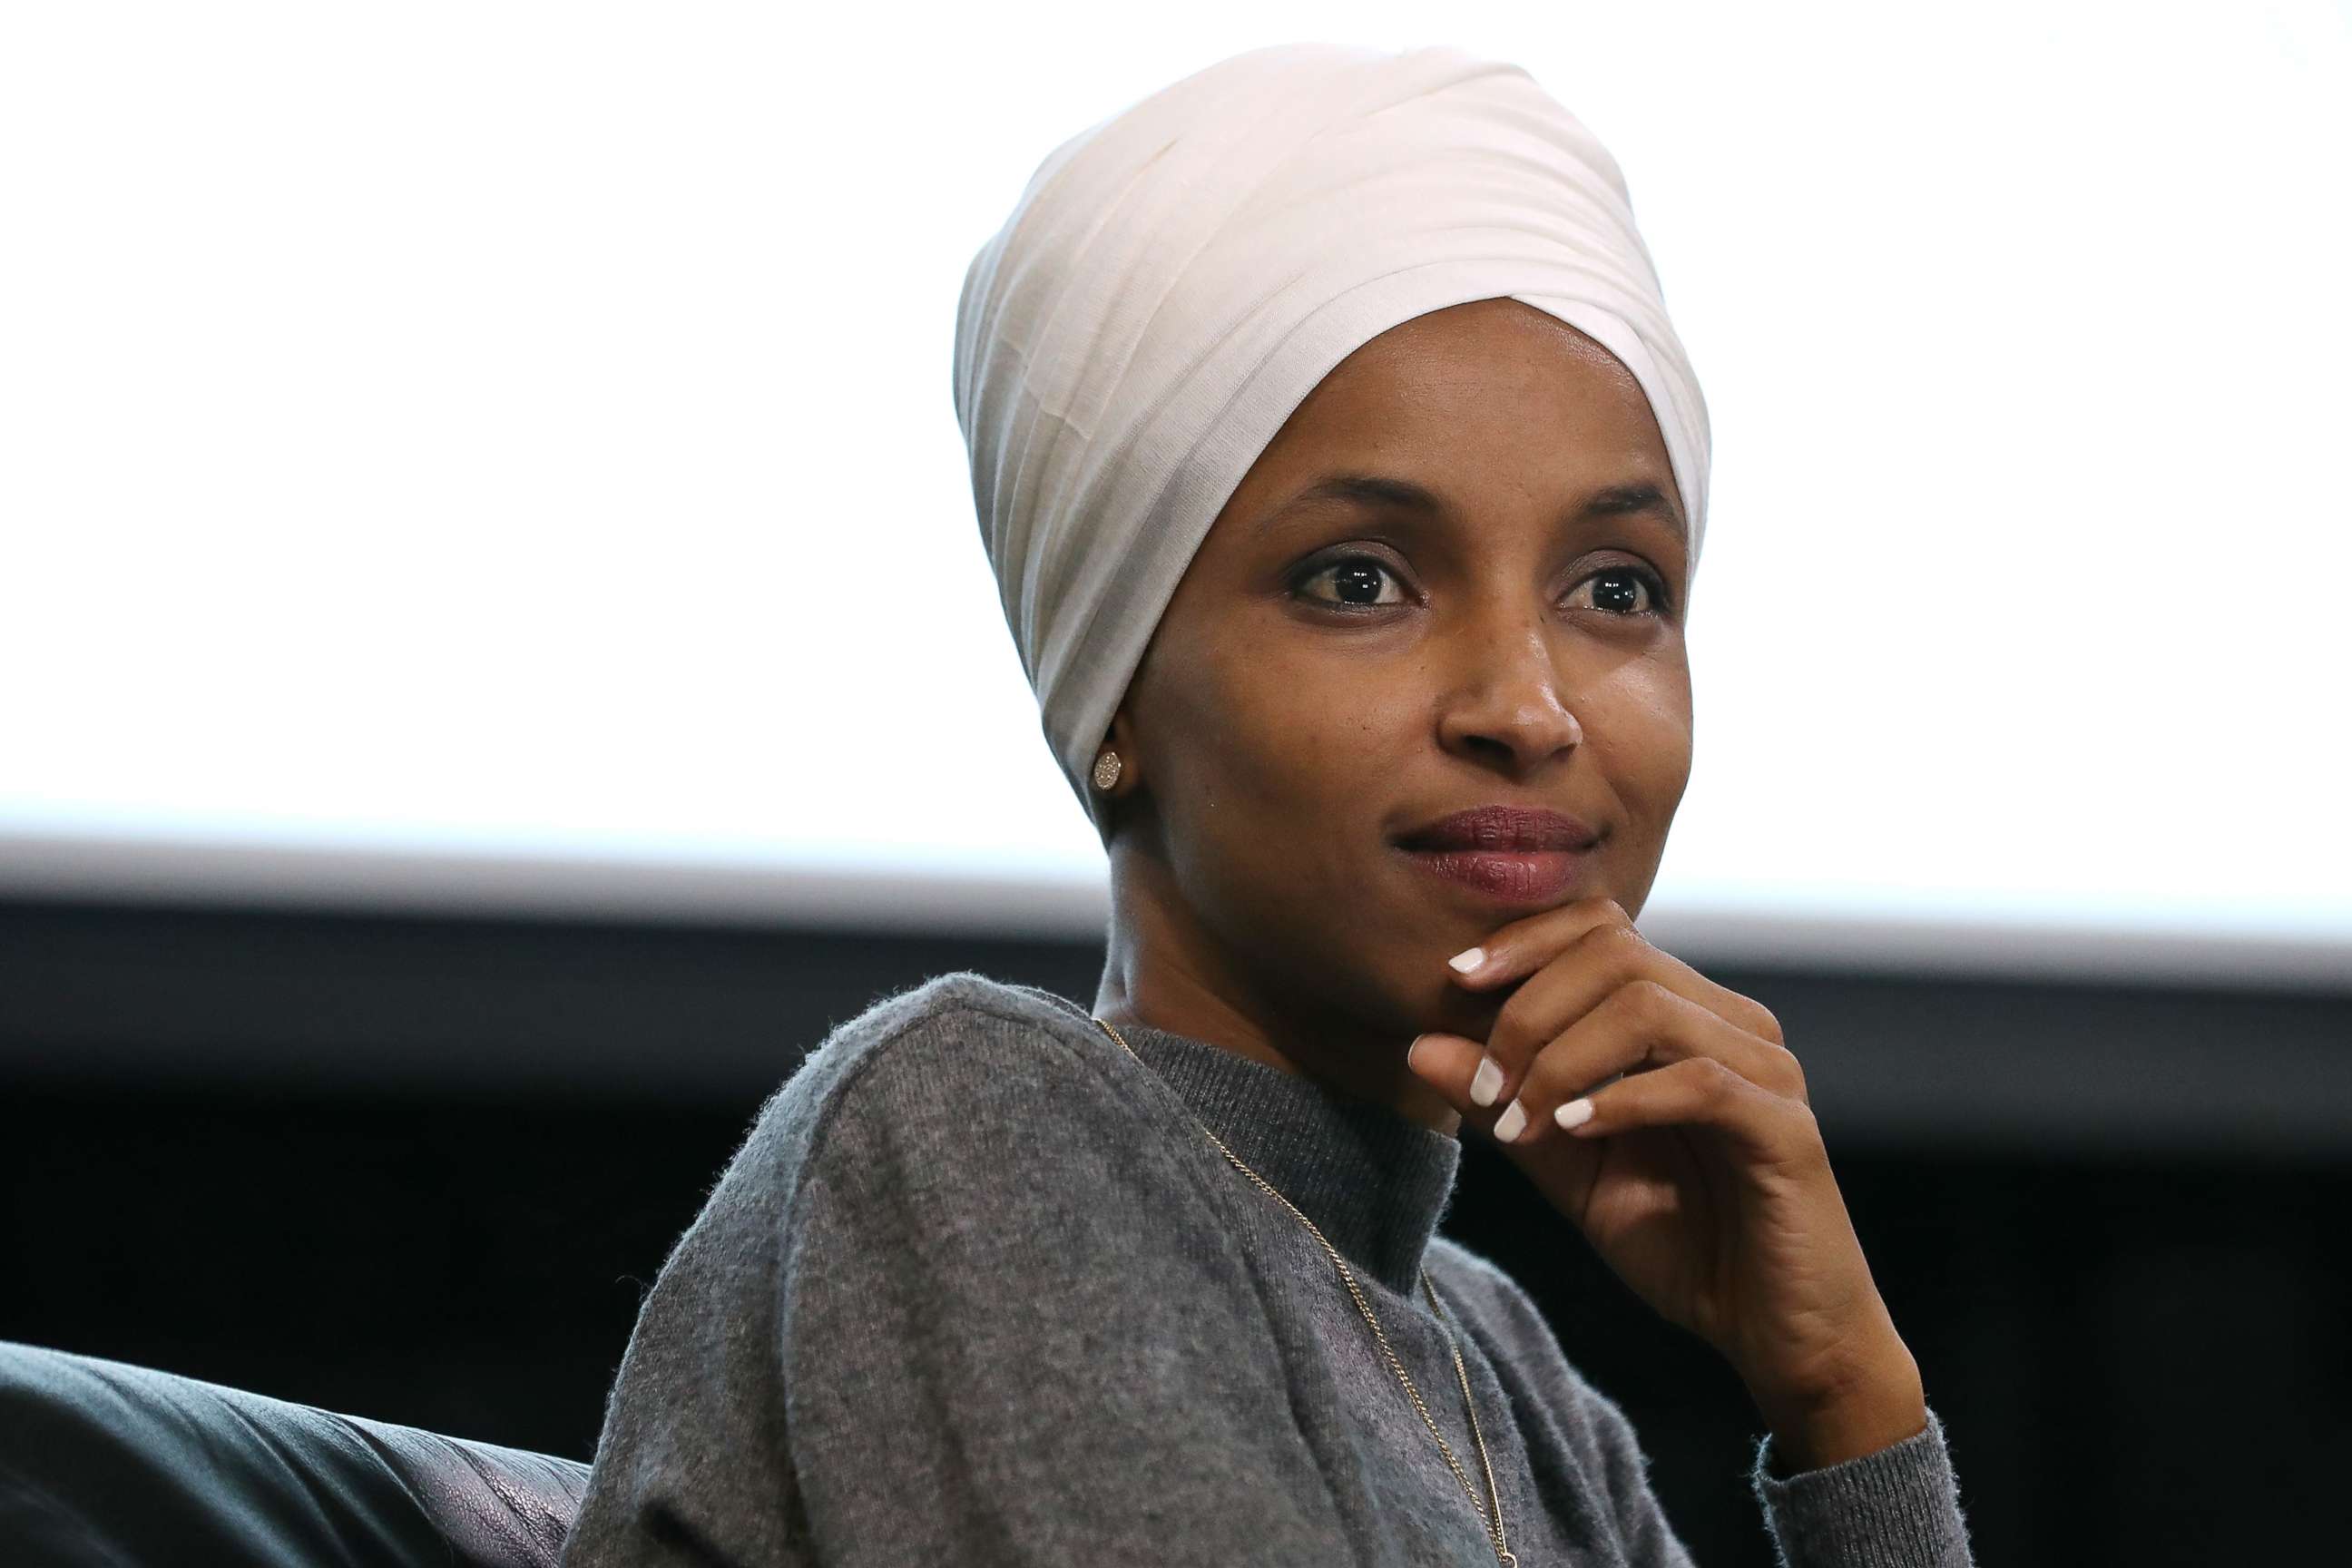 PHOTO: Rep. Ilhan Omar participates in a panel discussion during the Muslim Collective For Equitable Democracy Conference and Presidential Forum at the The National Housing Center July 23, 2019 in Washington, DC.